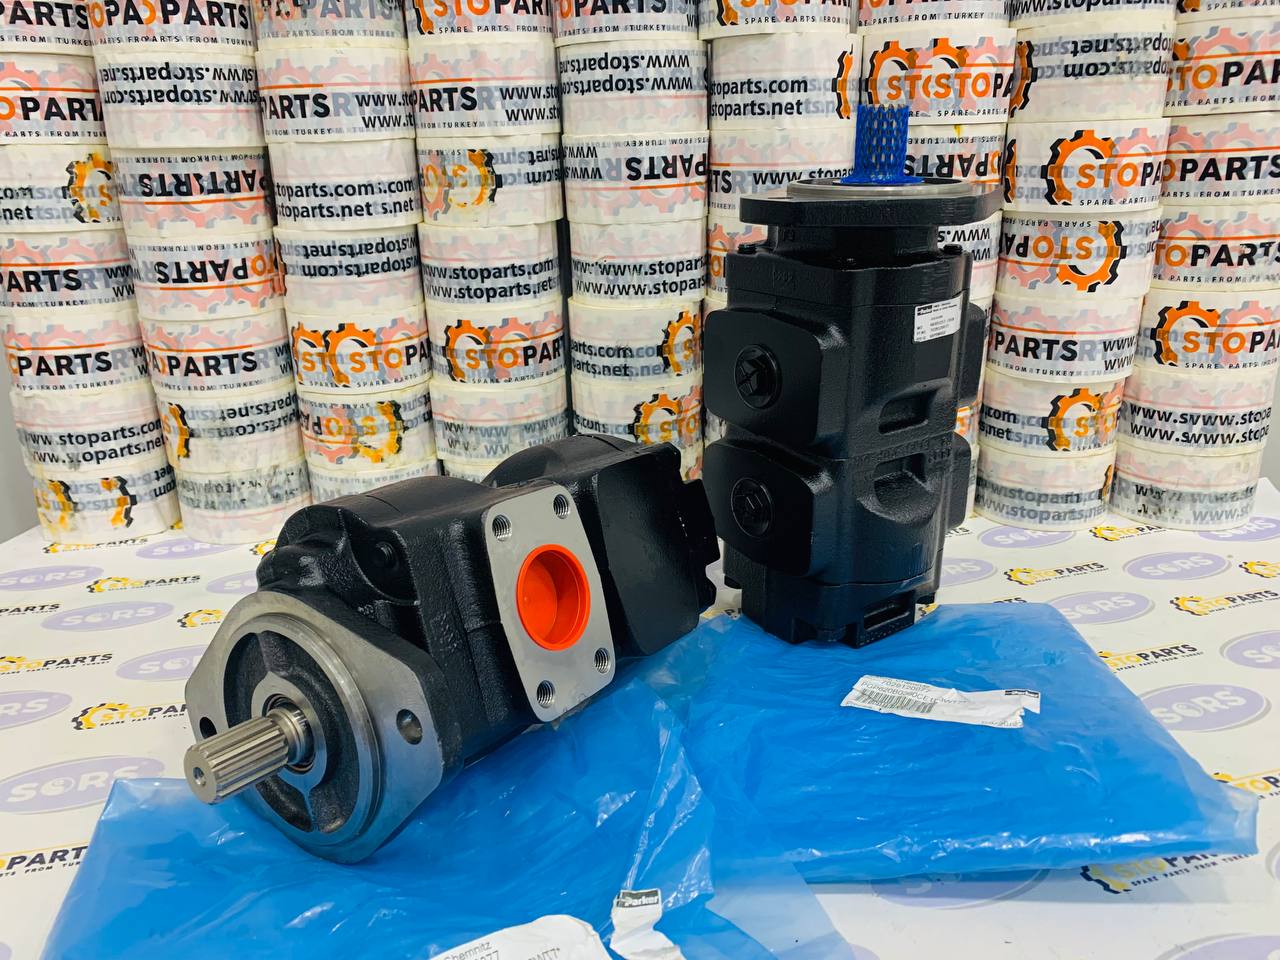 HYDRAULIC PUMP 333/G5390, 7029120077 FOR PARKER AND JCB